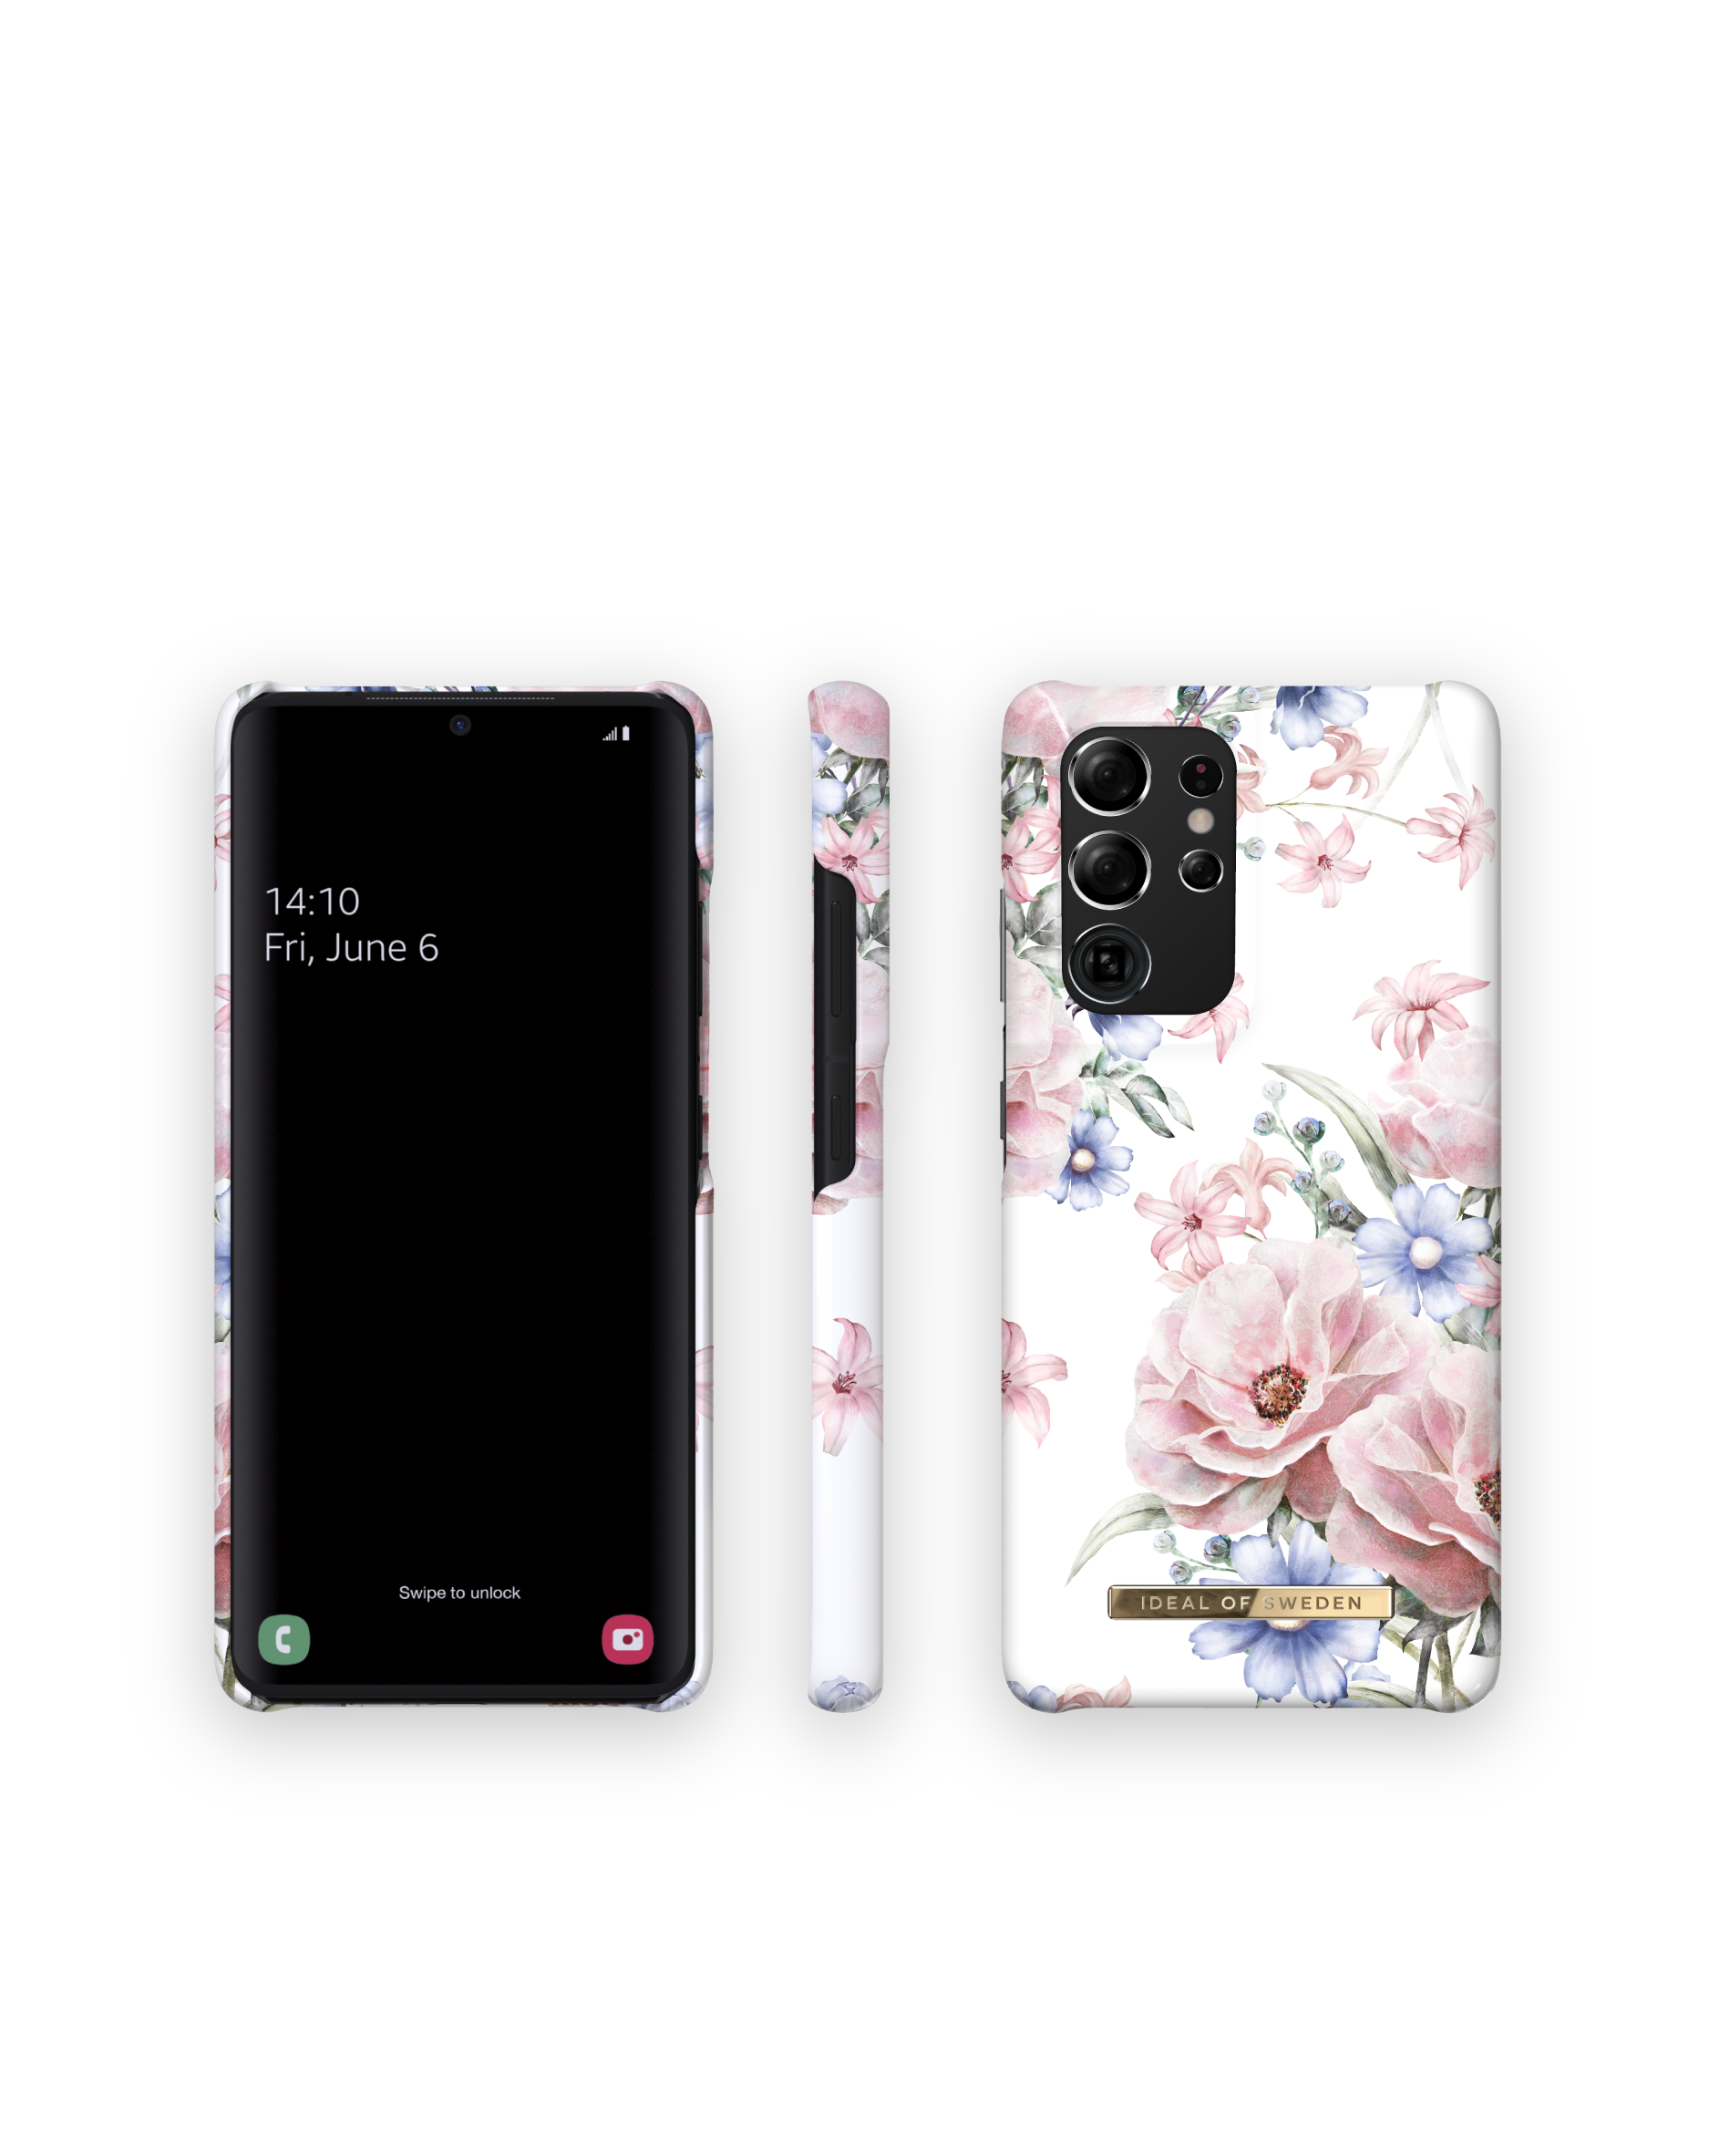 IDEAL OF SWEDEN IDFCS17-S21U-58, Backcover, Ultra, Galaxy Romance S21 Samsung, Floral